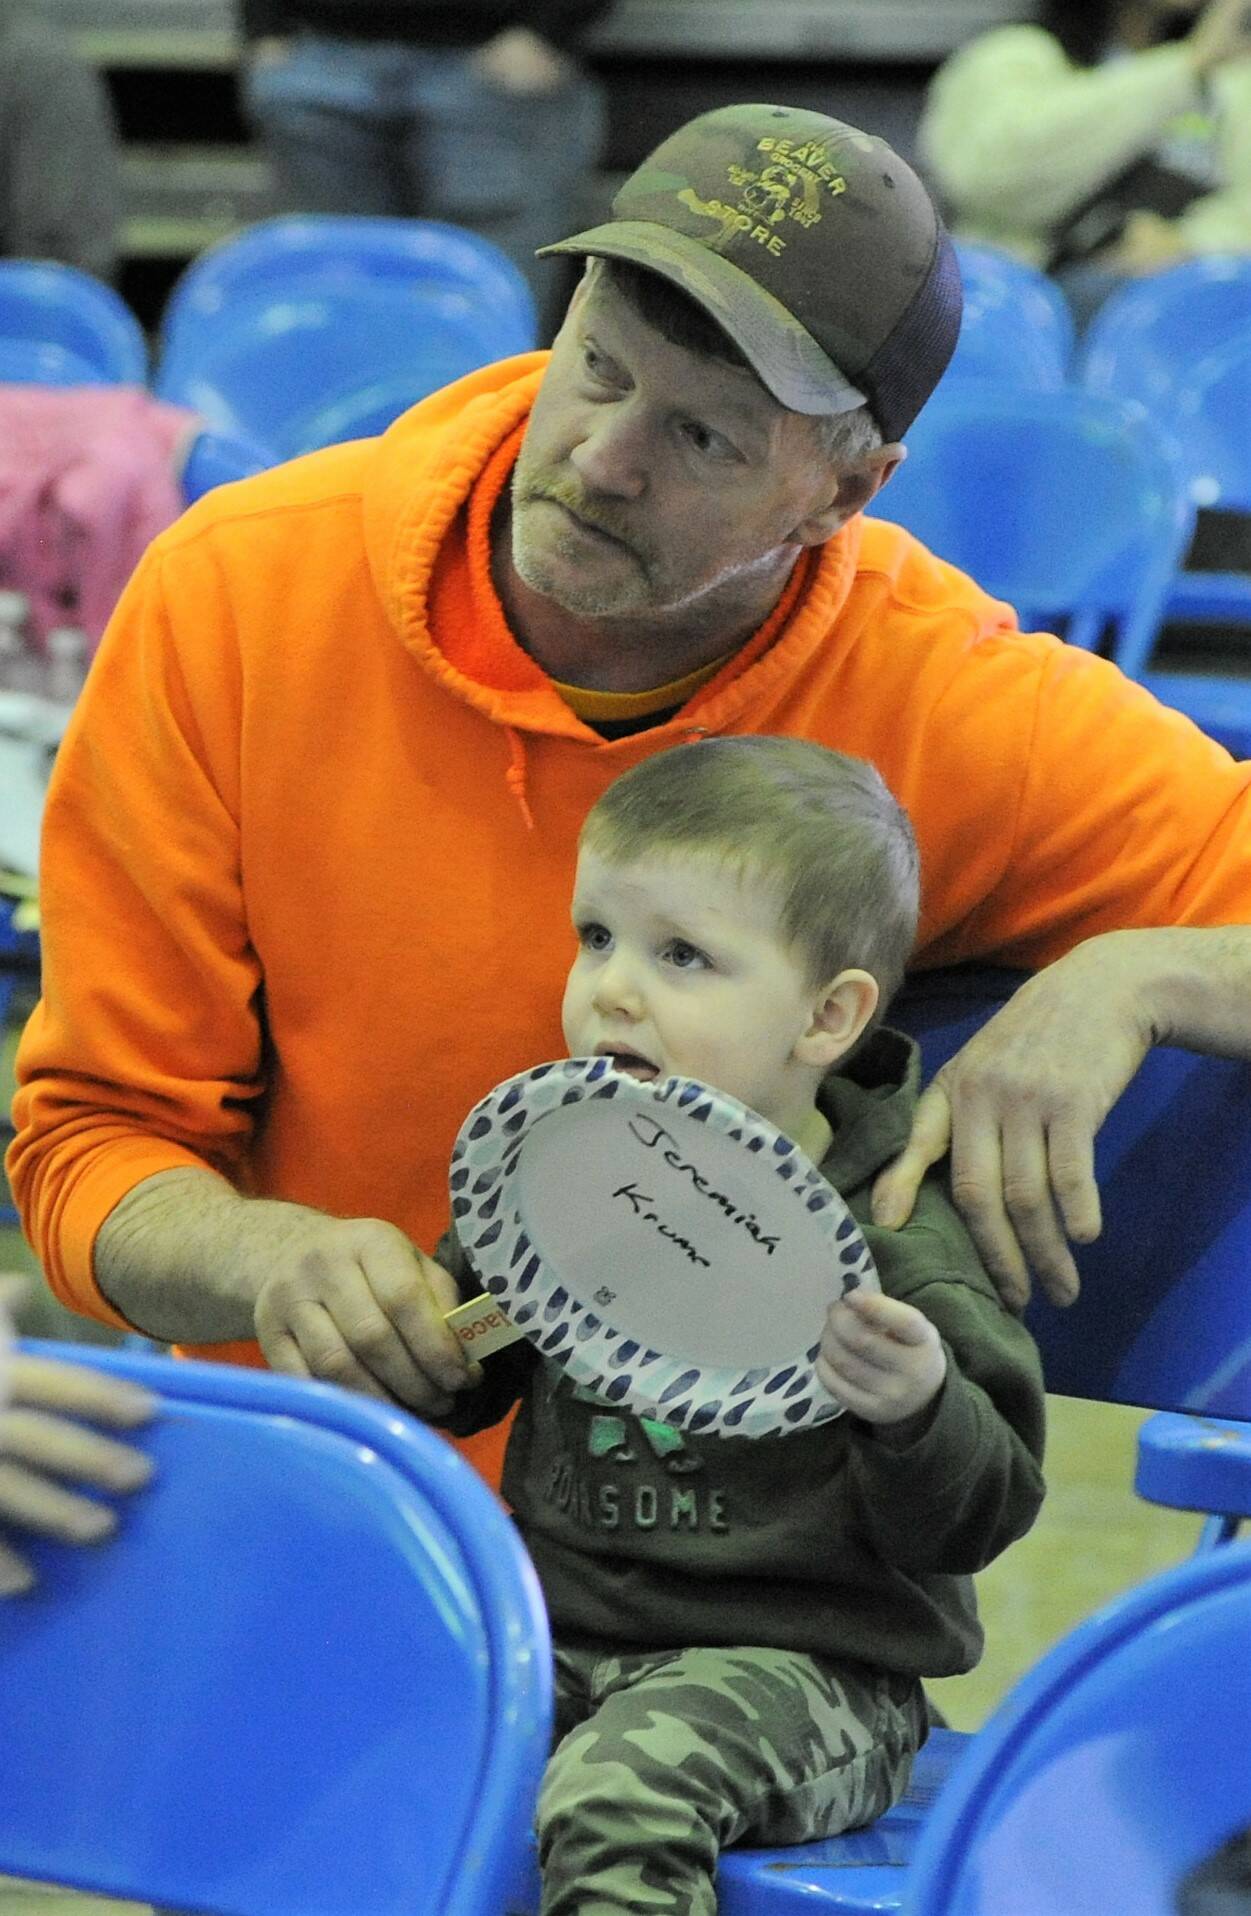 With the help of Andy Krume, two-year-old Jeremiah Krume makes his bid at the scholarship auction Saturday. Photo by Lonnie Archibald